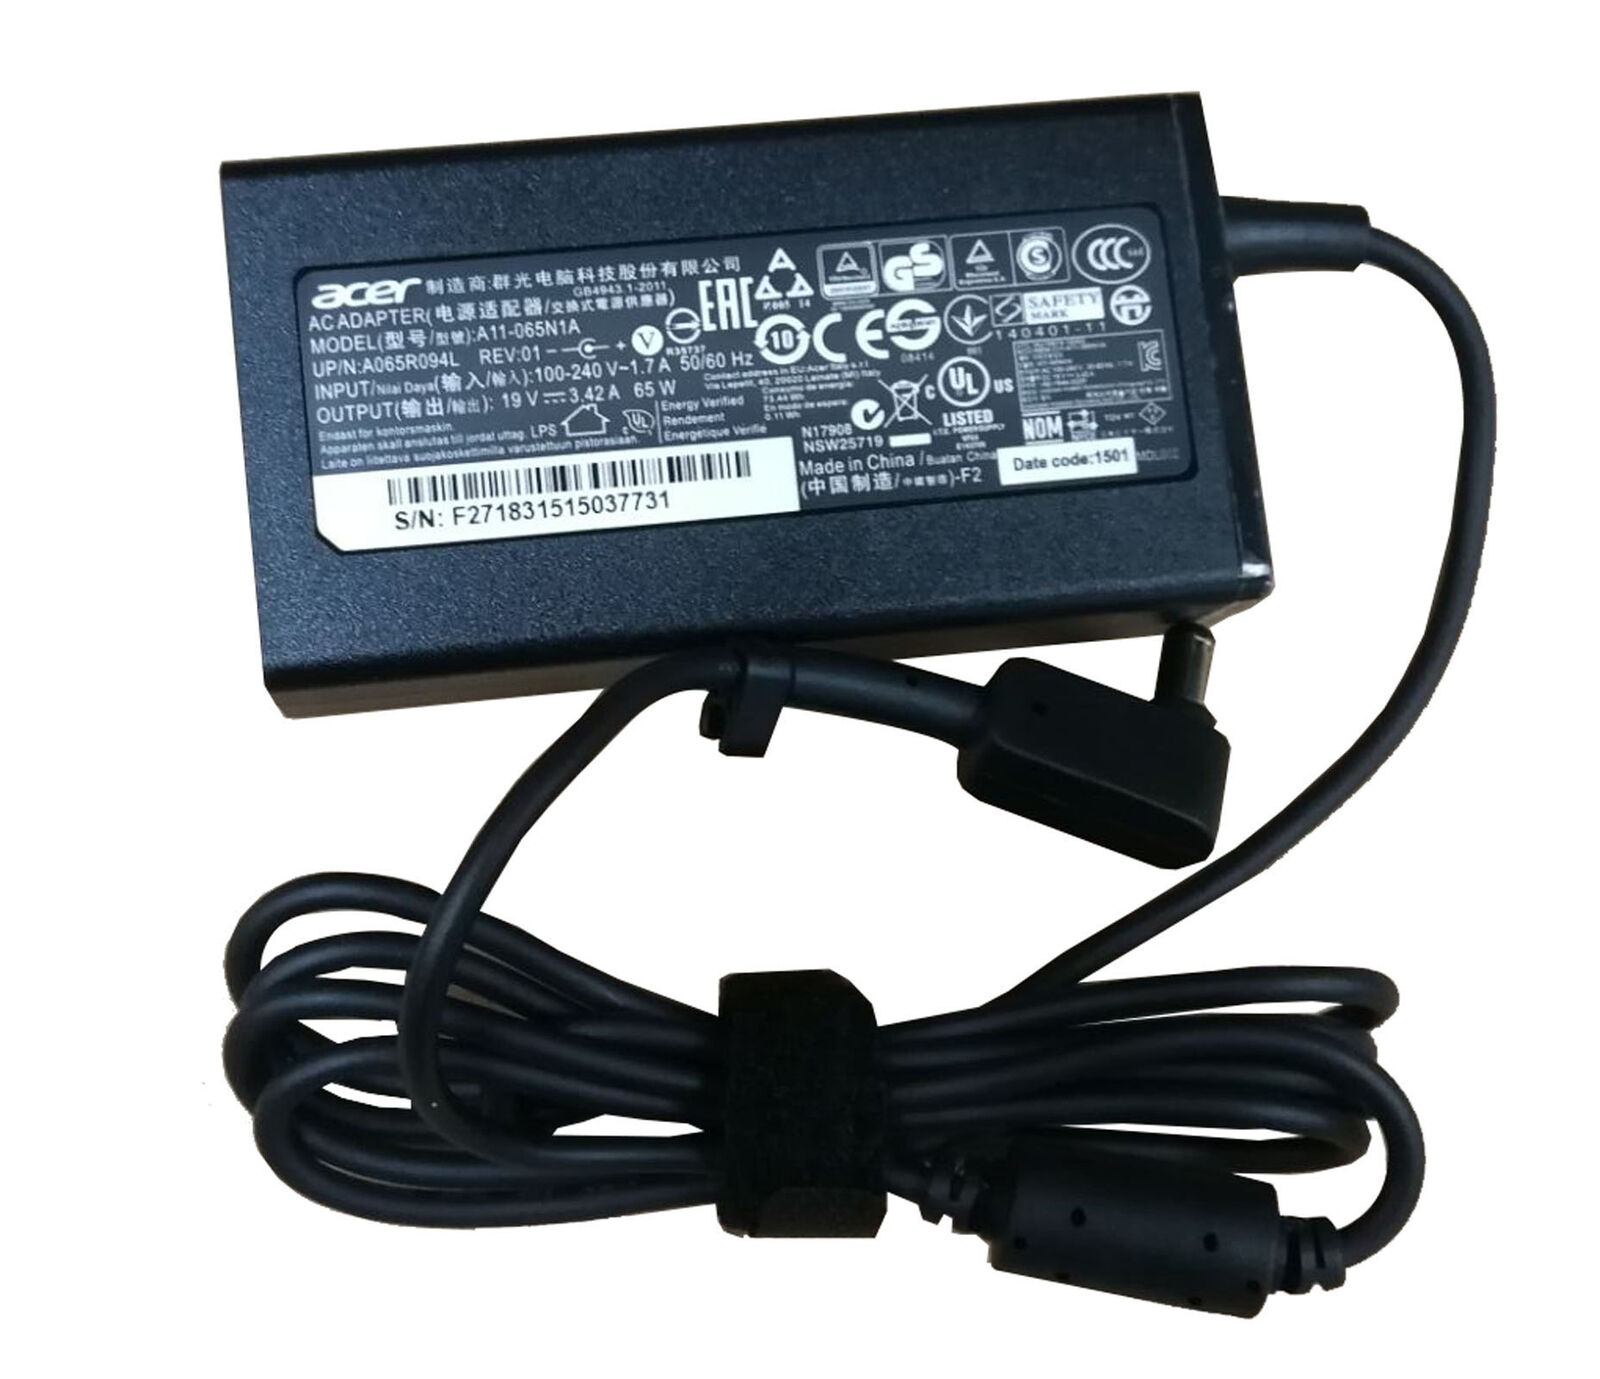 65W Acer Chromebook R11 CB5 C720-2103 Charger AC Adapter Power Cord